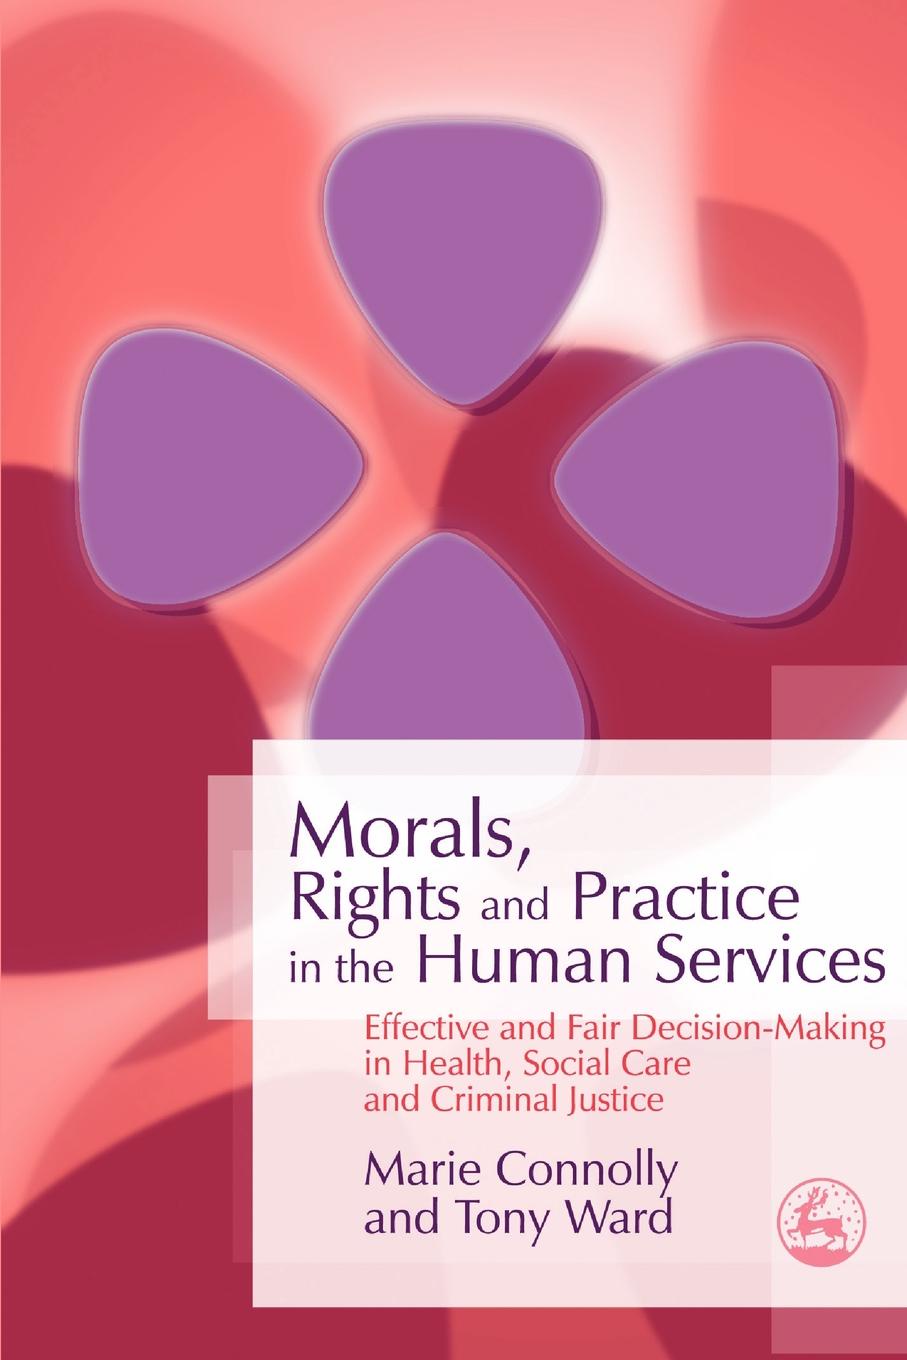 Morals, Rights and Practice in the Human Services. Effective and Fair Decision-Making in Health, Social Care and Criminal Justice